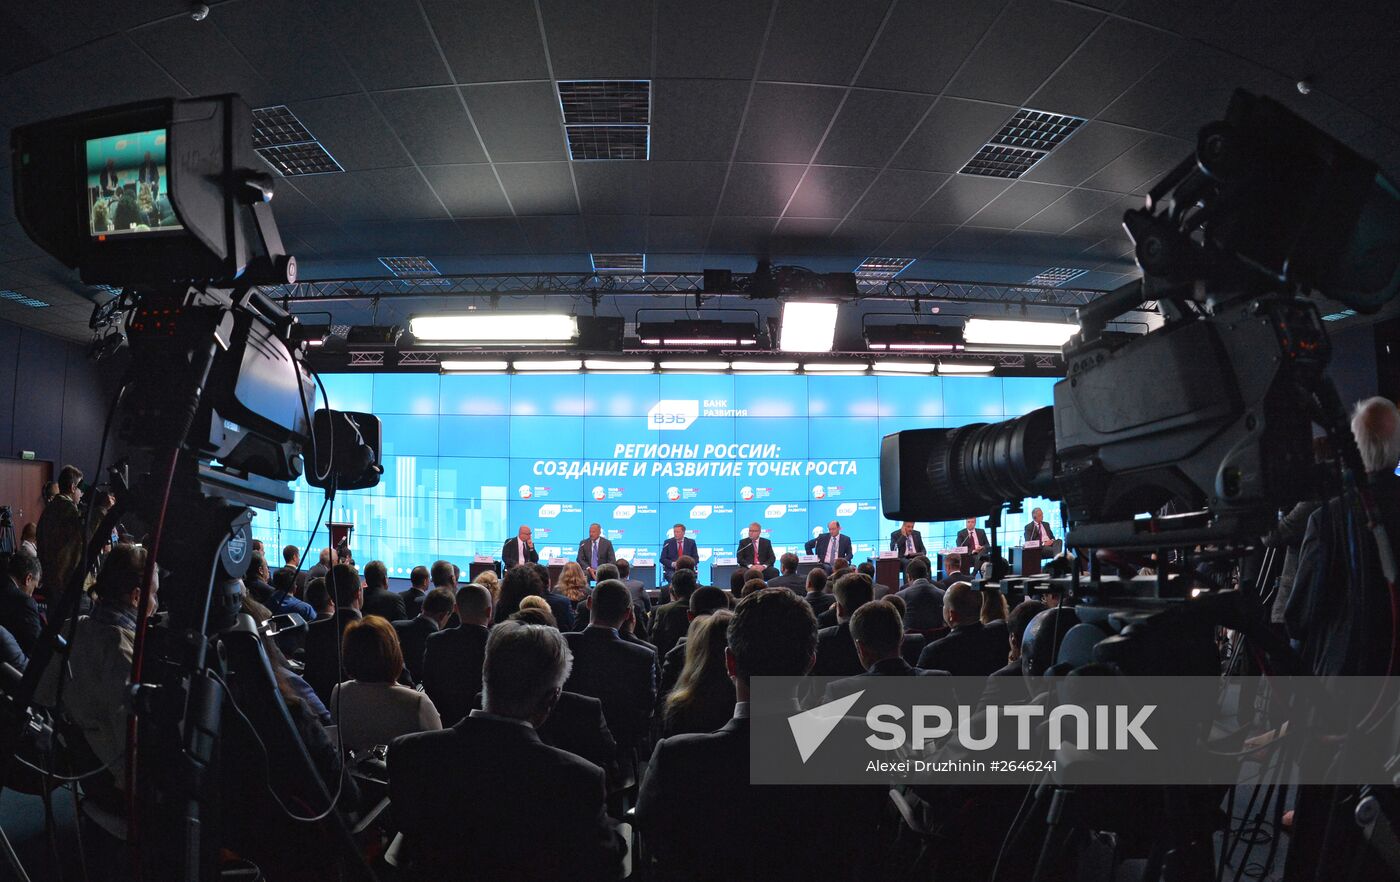 Panel session, The Russian Regions’ Growth Formula: Freedom to Experiment, at 2015 St. Petersburg International Economic Forum